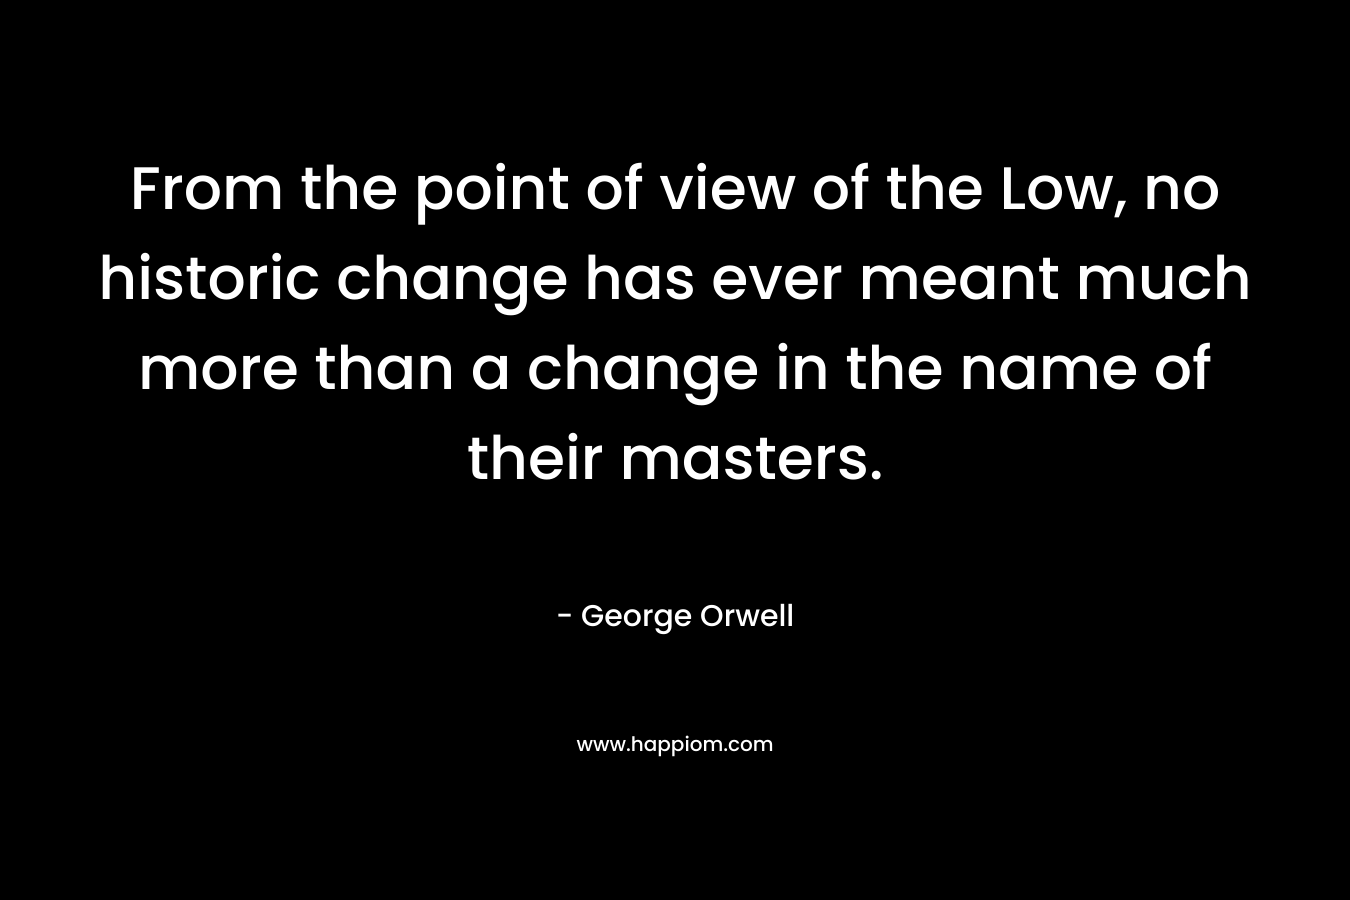 From the point of view of the Low, no historic change has ever meant much more than a change in the name of their masters. – George Orwell